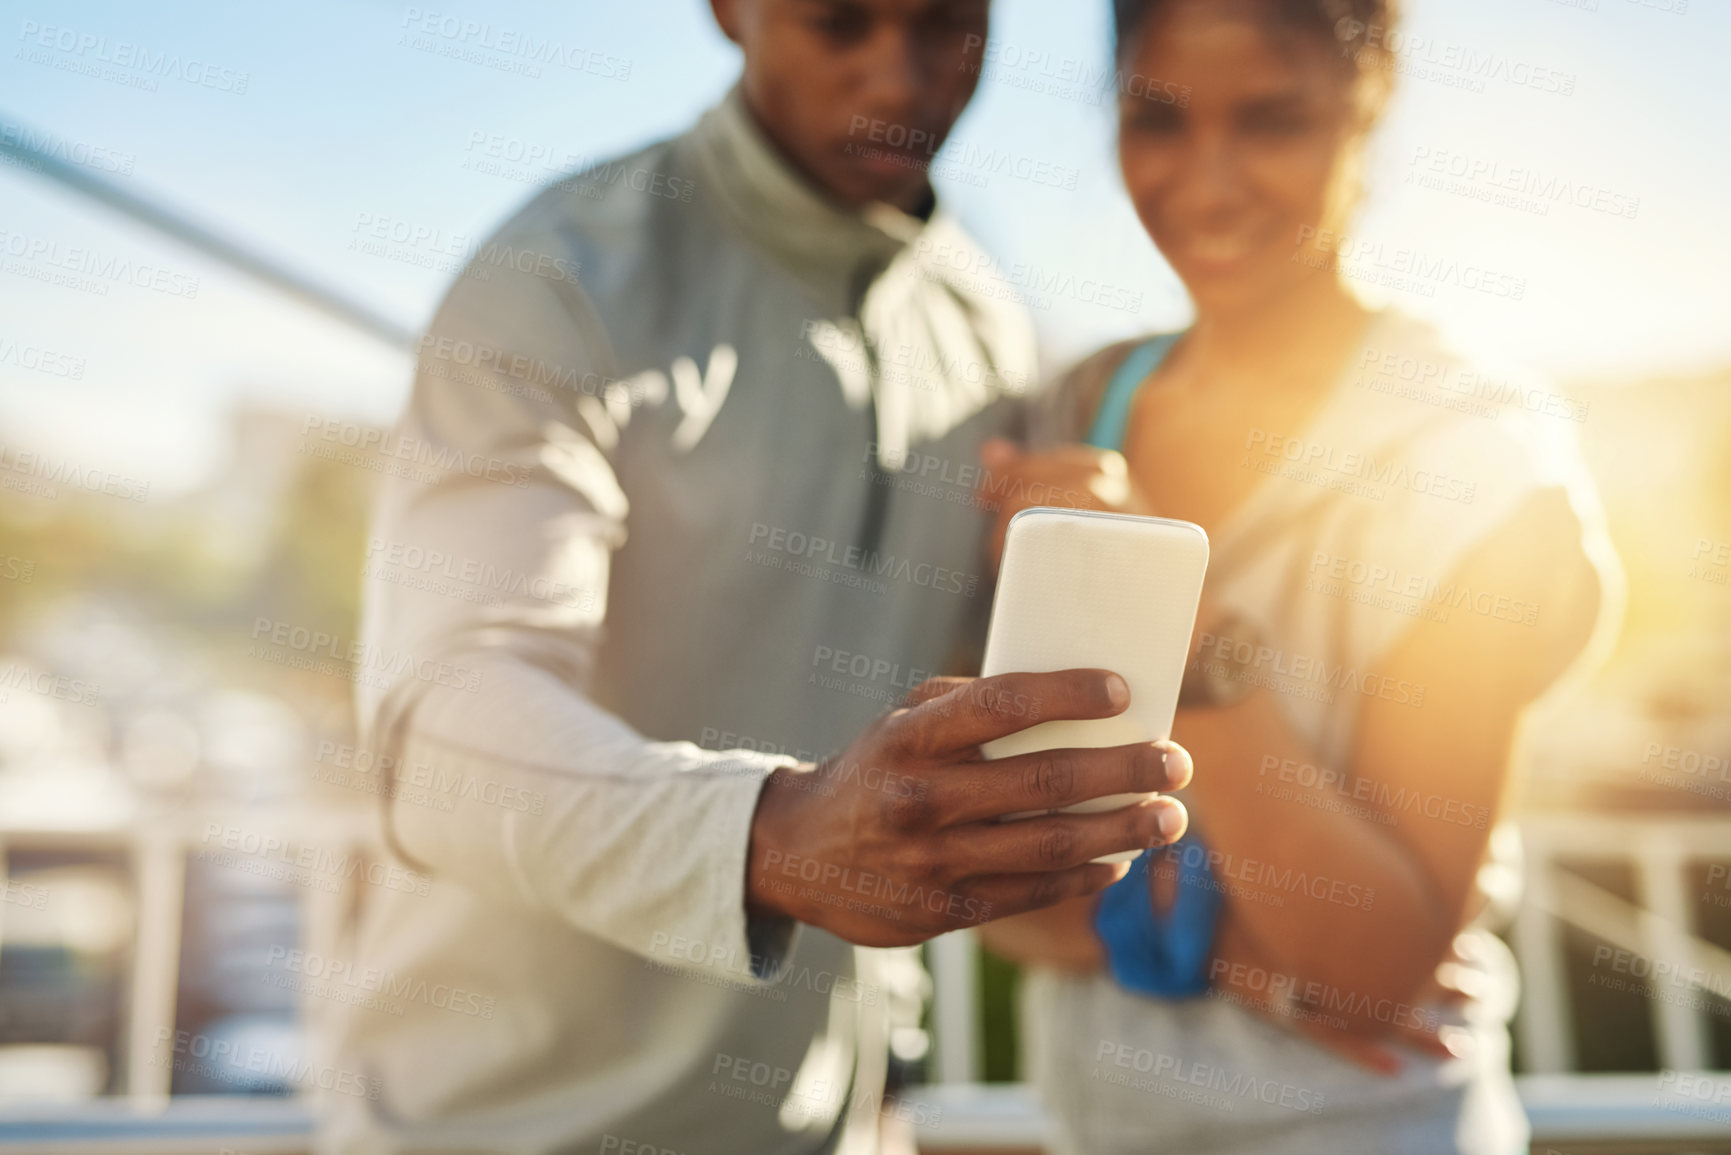 Buy stock photo Shot of a young sporty couple taking a photo together with a cellphone